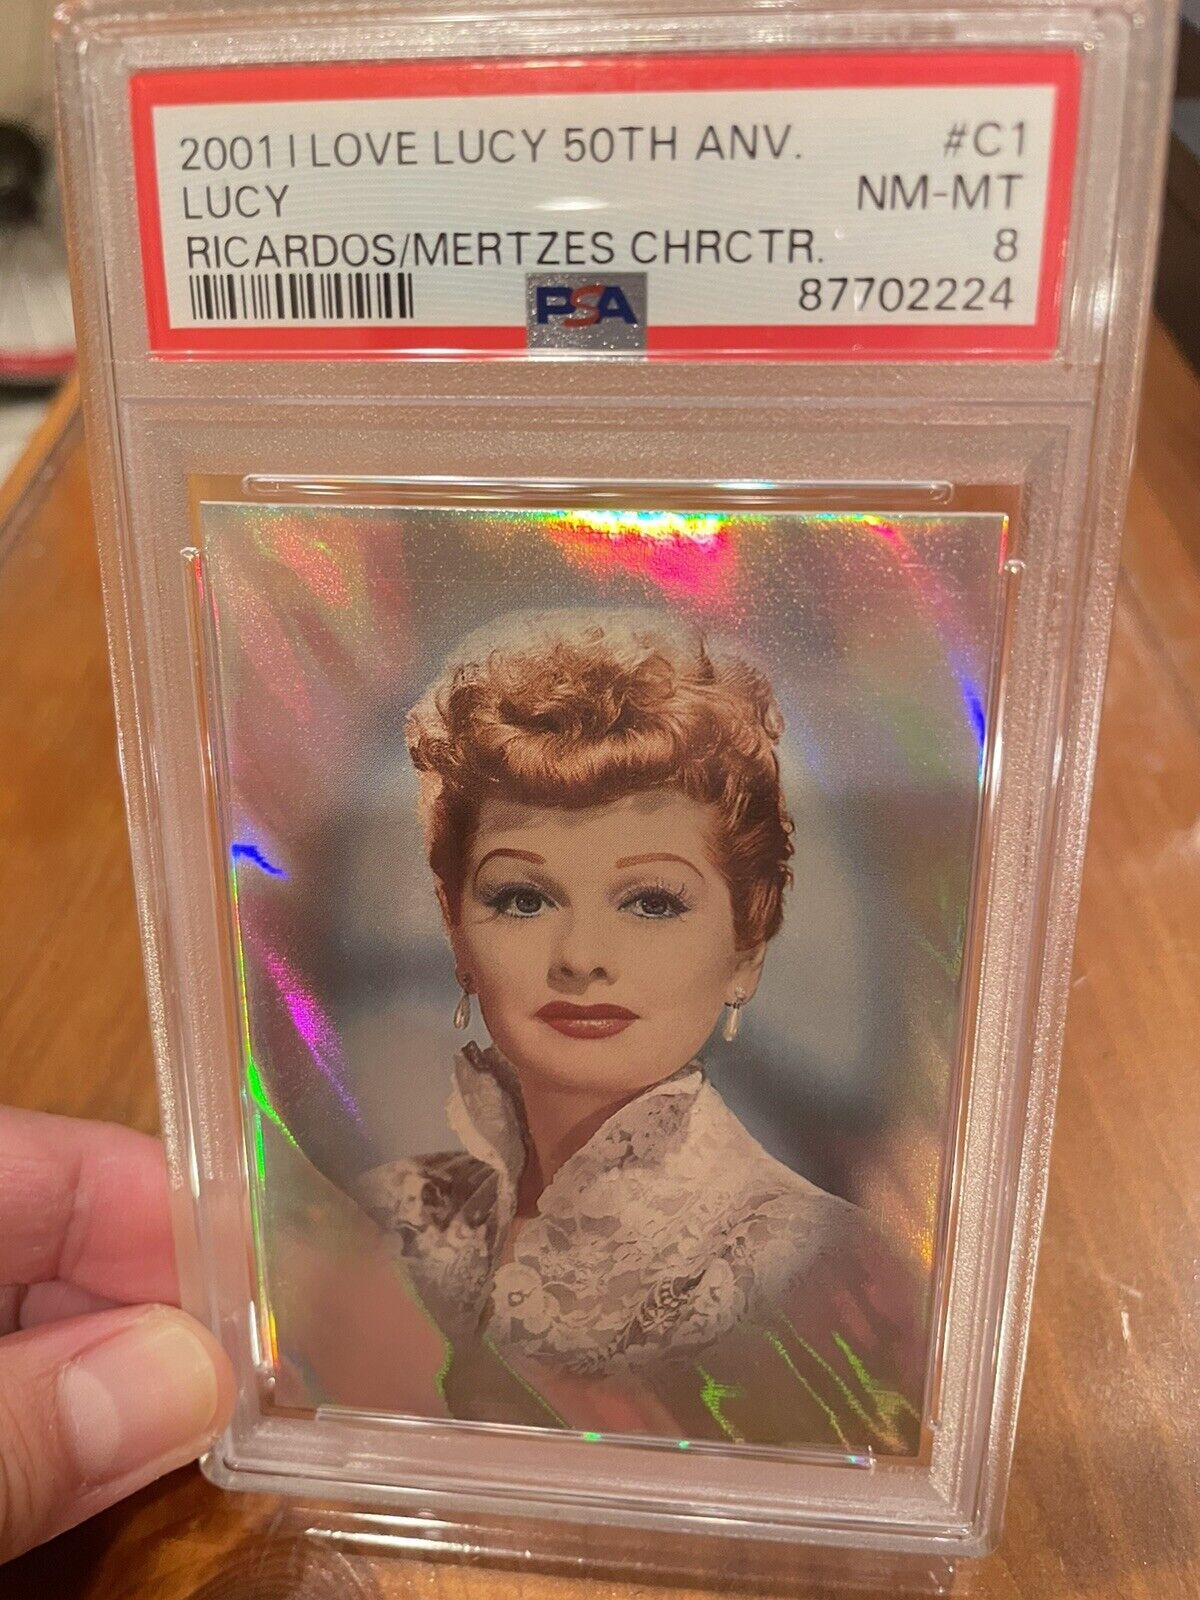 2001 I love Lucy 50th Anniversary Lucy Ball, PSA population 1